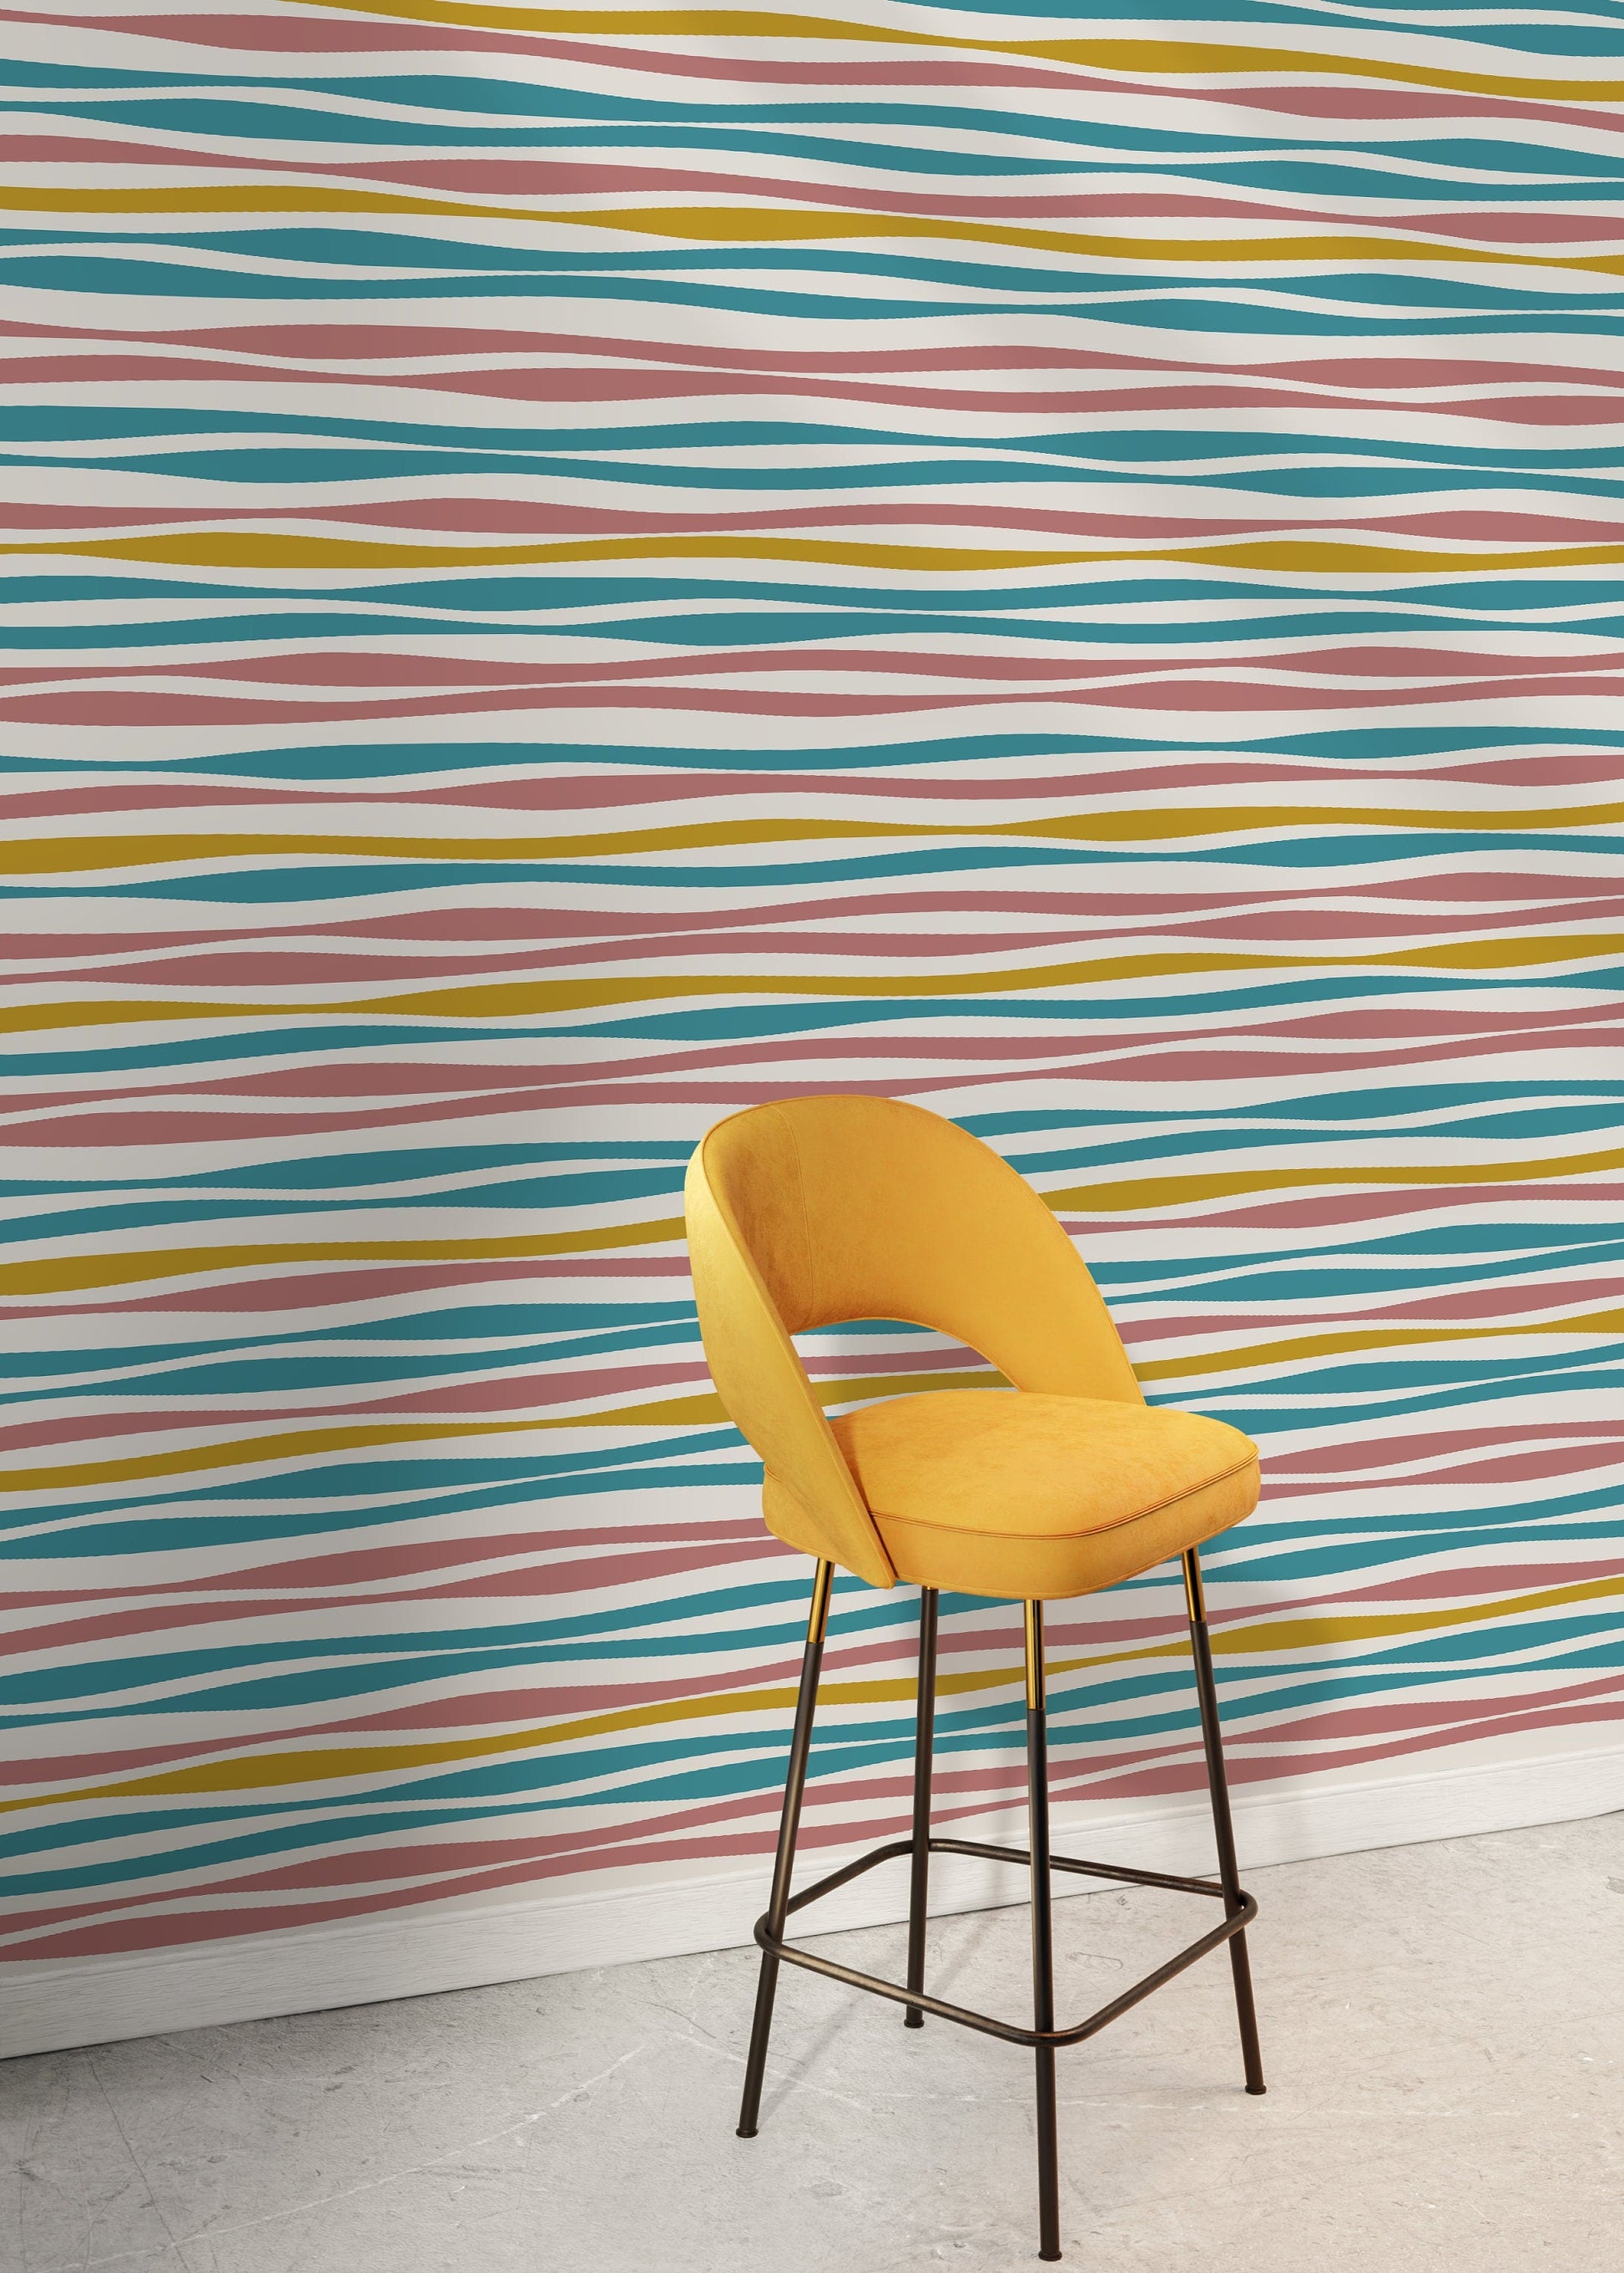 Colorful Abstract Striped Wallpaper / Peel and Stick Wallpaper Removable Wallpaper Home Decor Wall Art Wall Decor Room Decor - D490